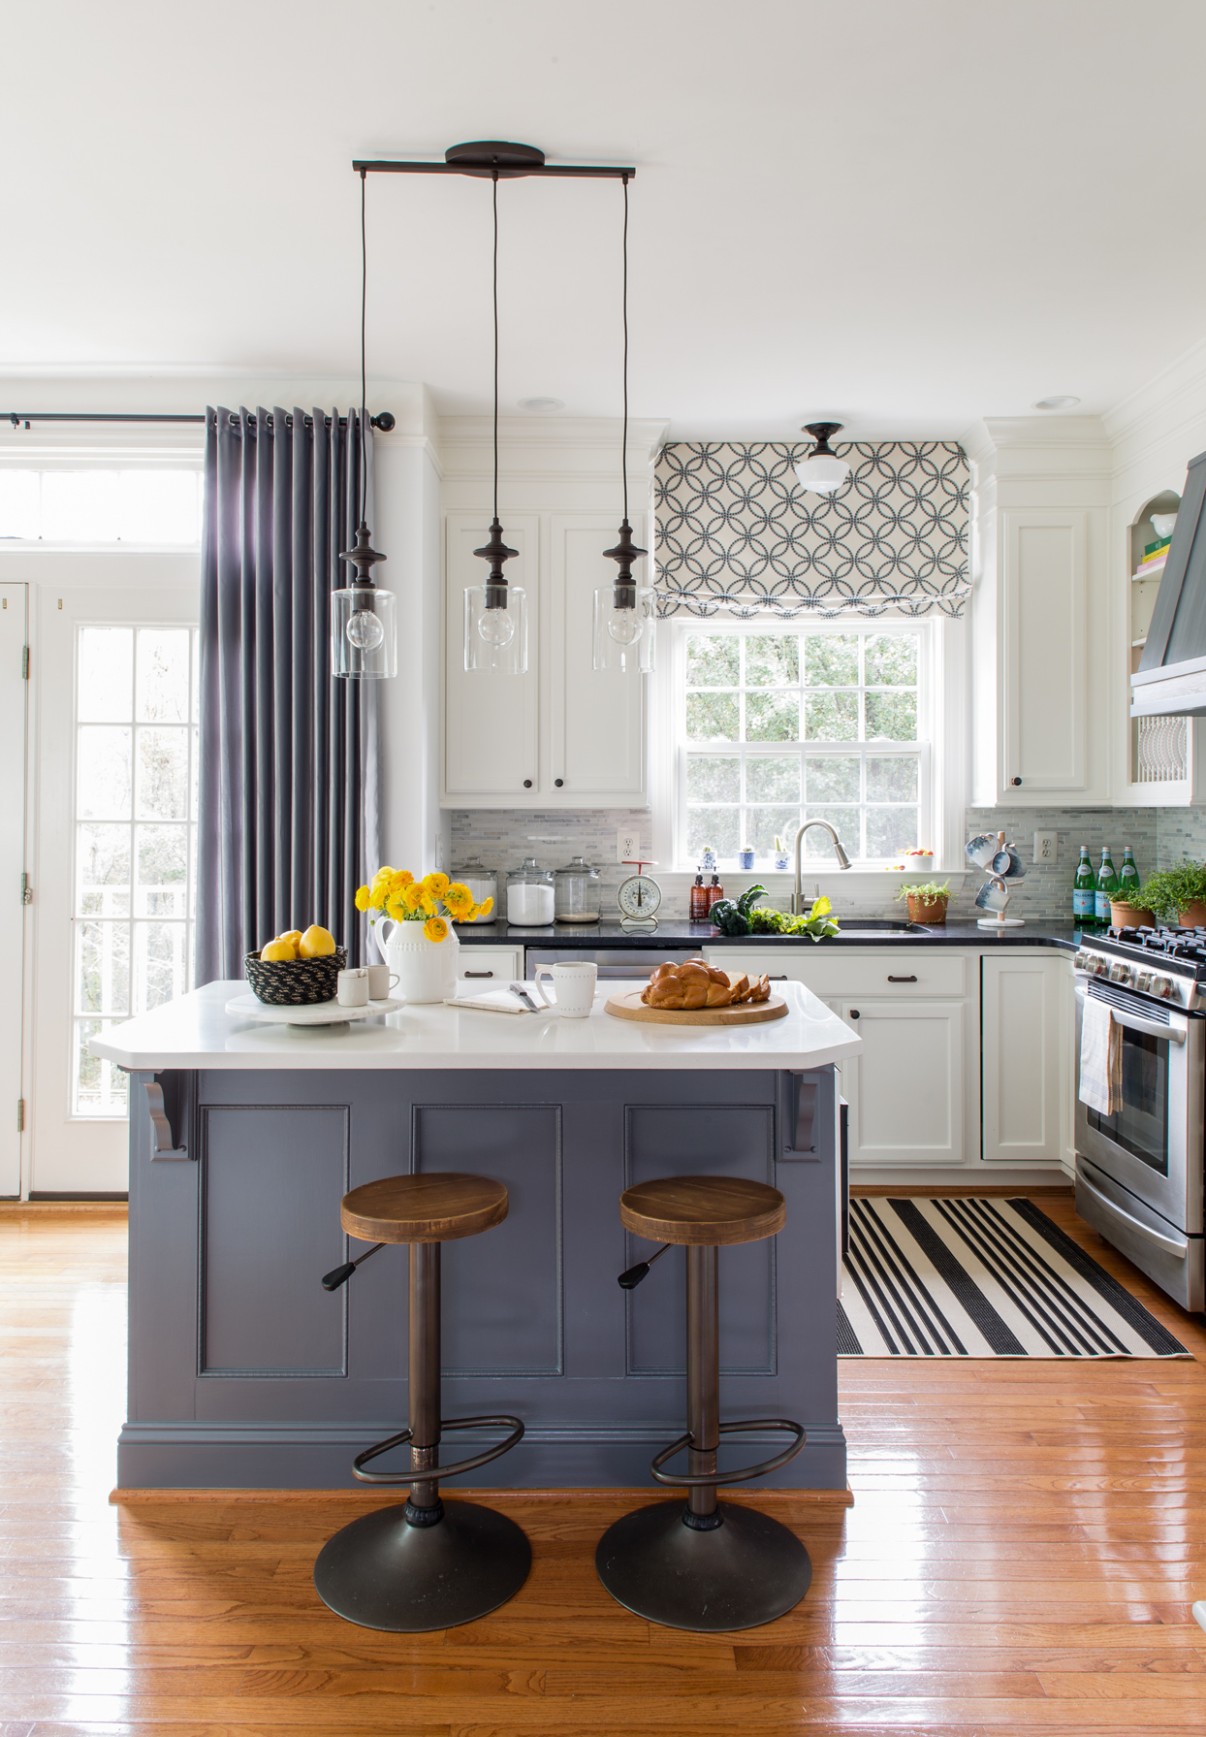 5 Contrasting Kitchen Island Ideas for a Stand-Out Space  Better